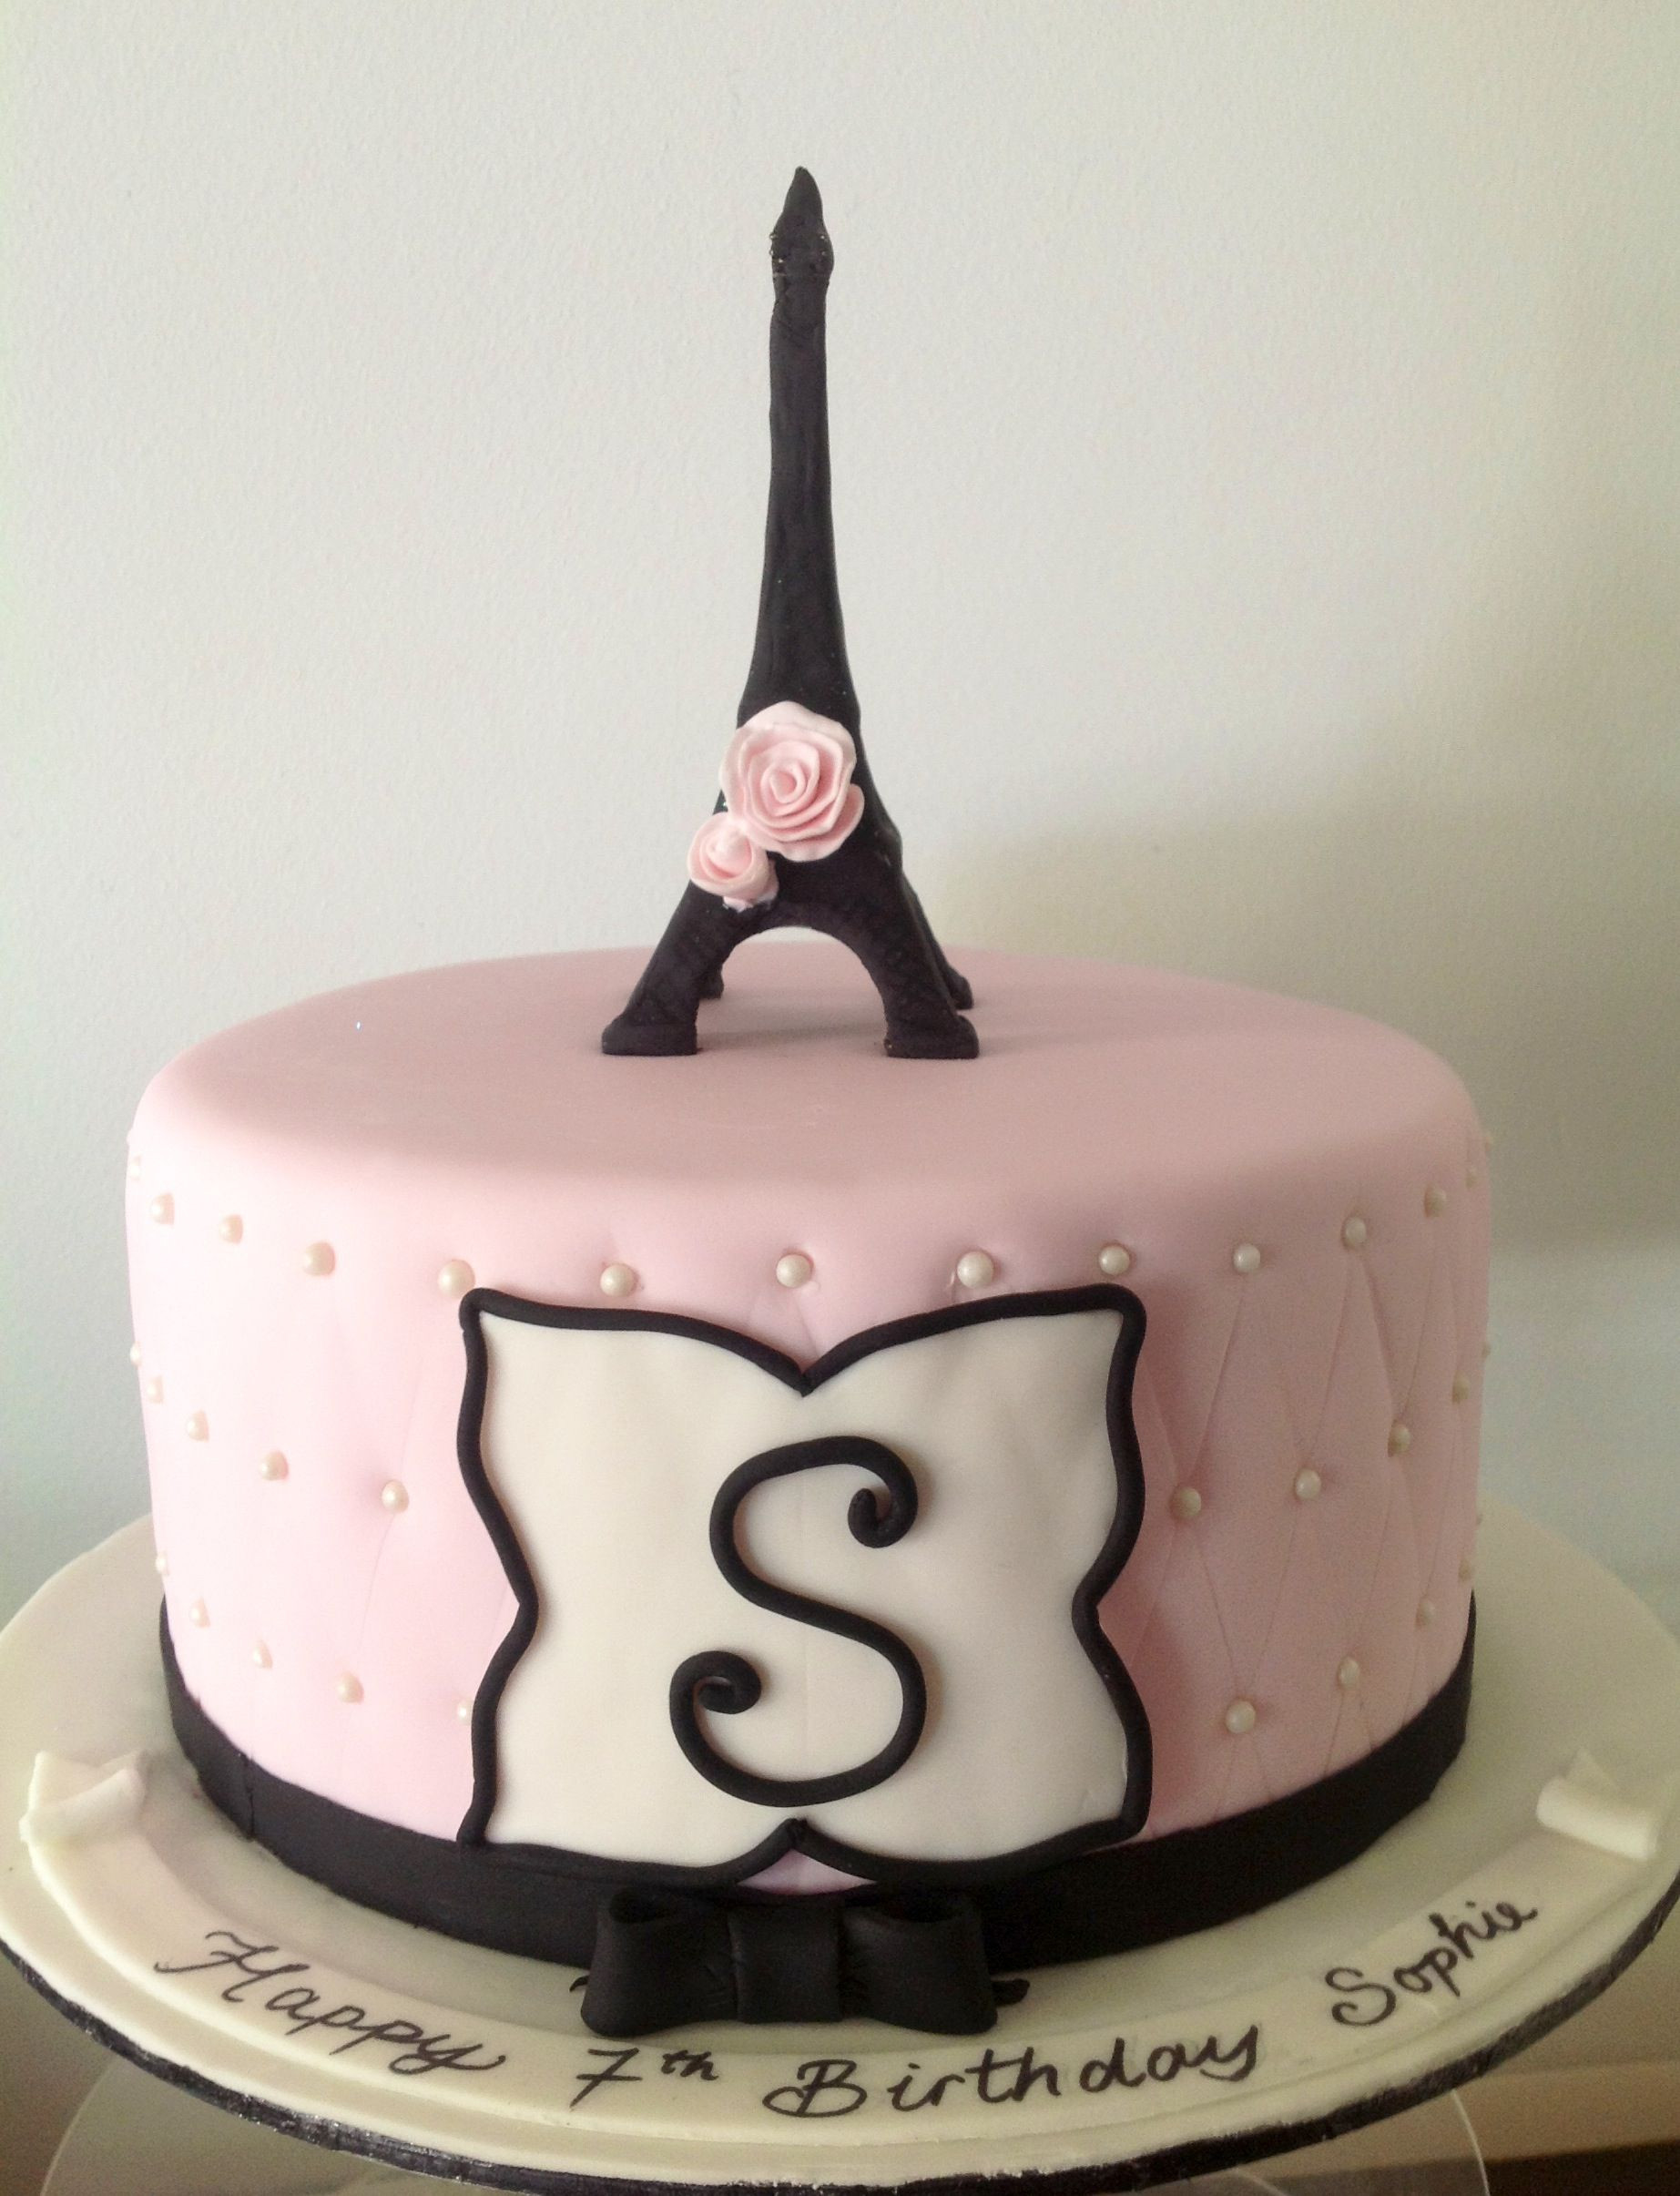 Eiffel Tower Birthday Cake
 Pink and pearls Eiffel Tower fondant birthday cake for a